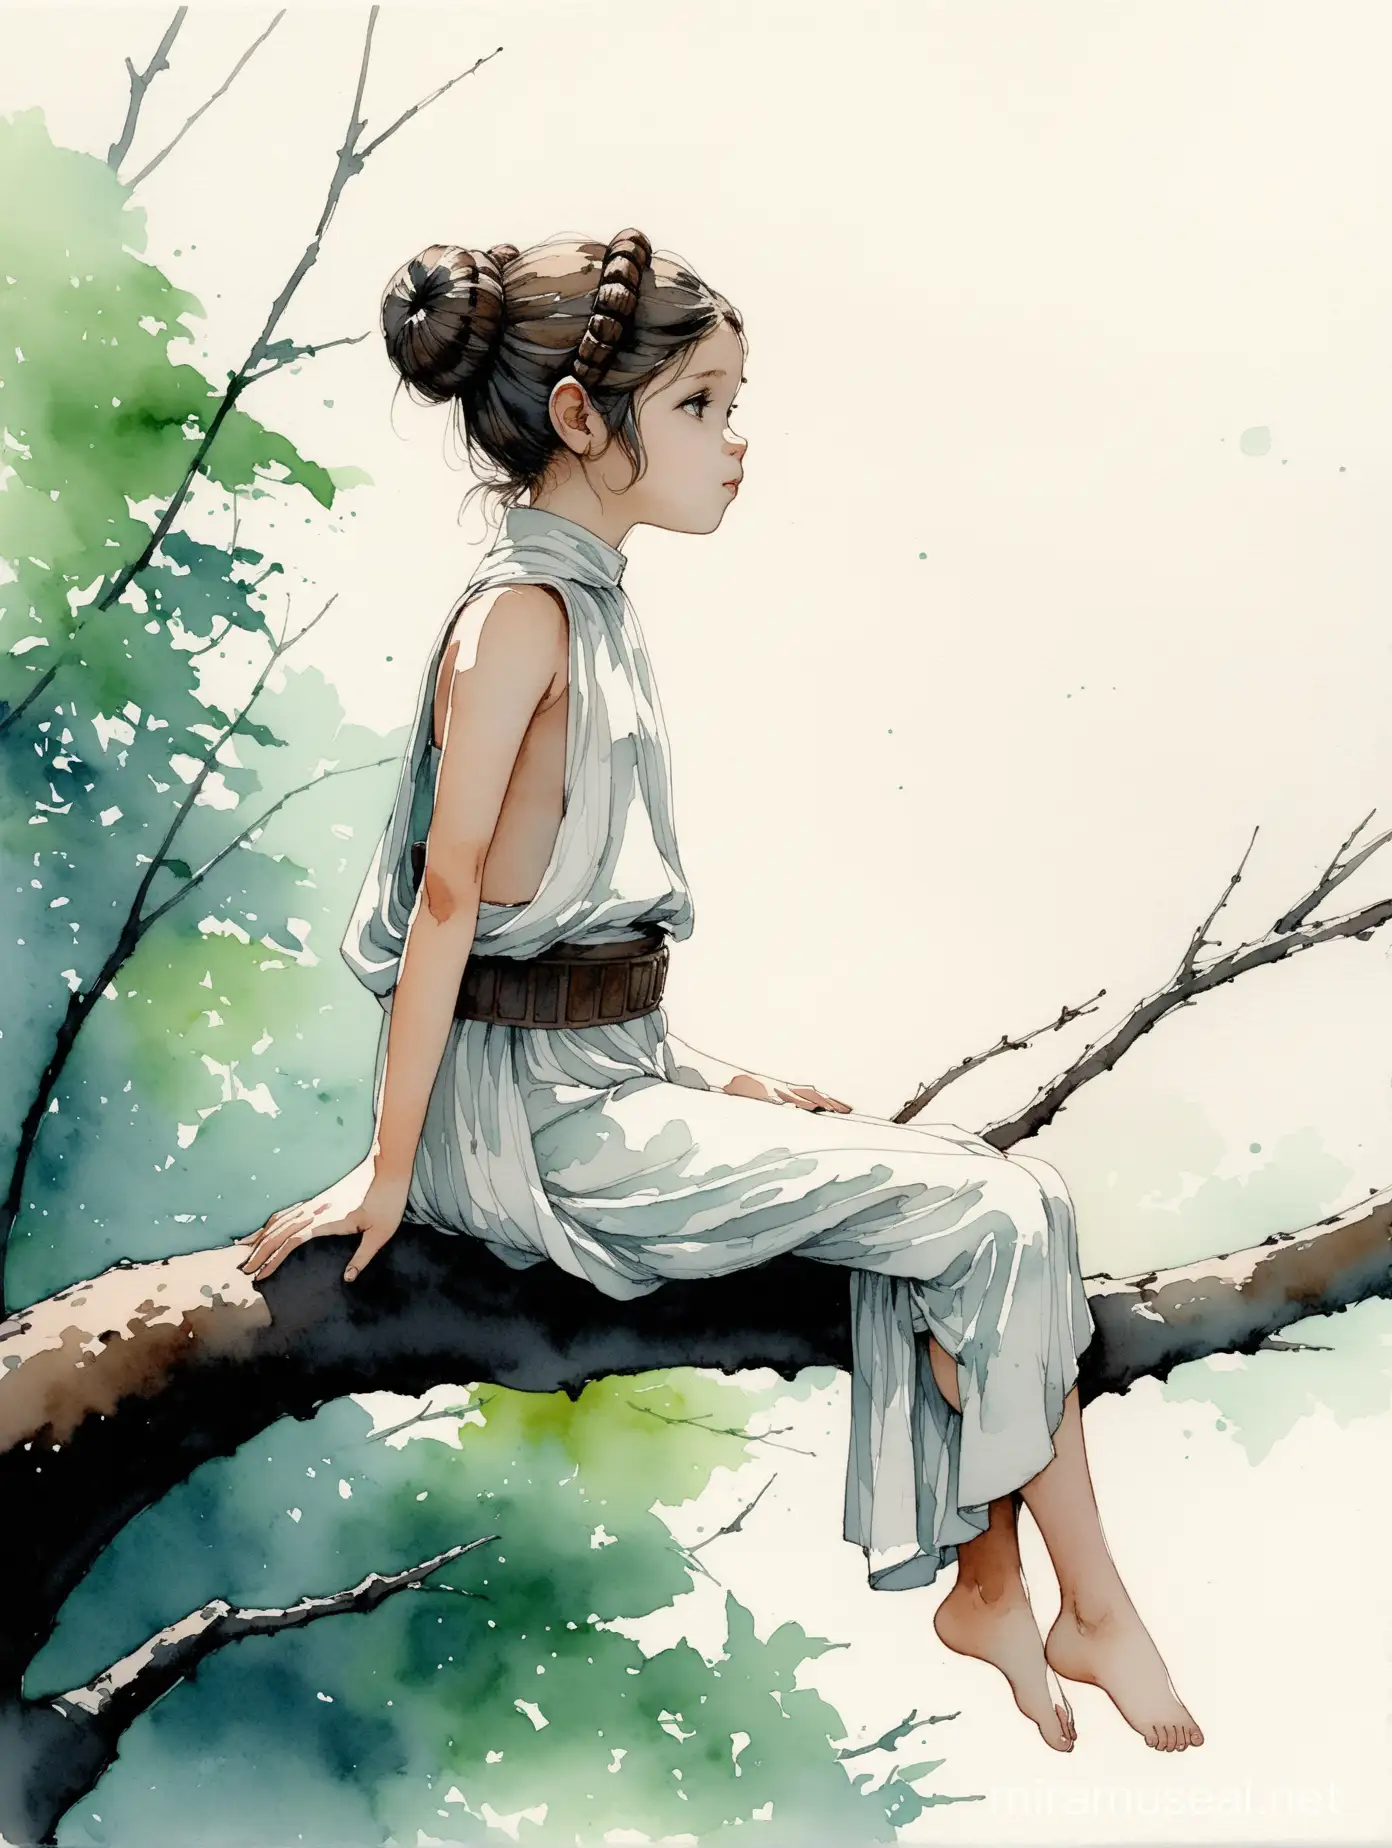 Child Princess Leia Sitting on Tree Branch Detailed Watercolor Illustration